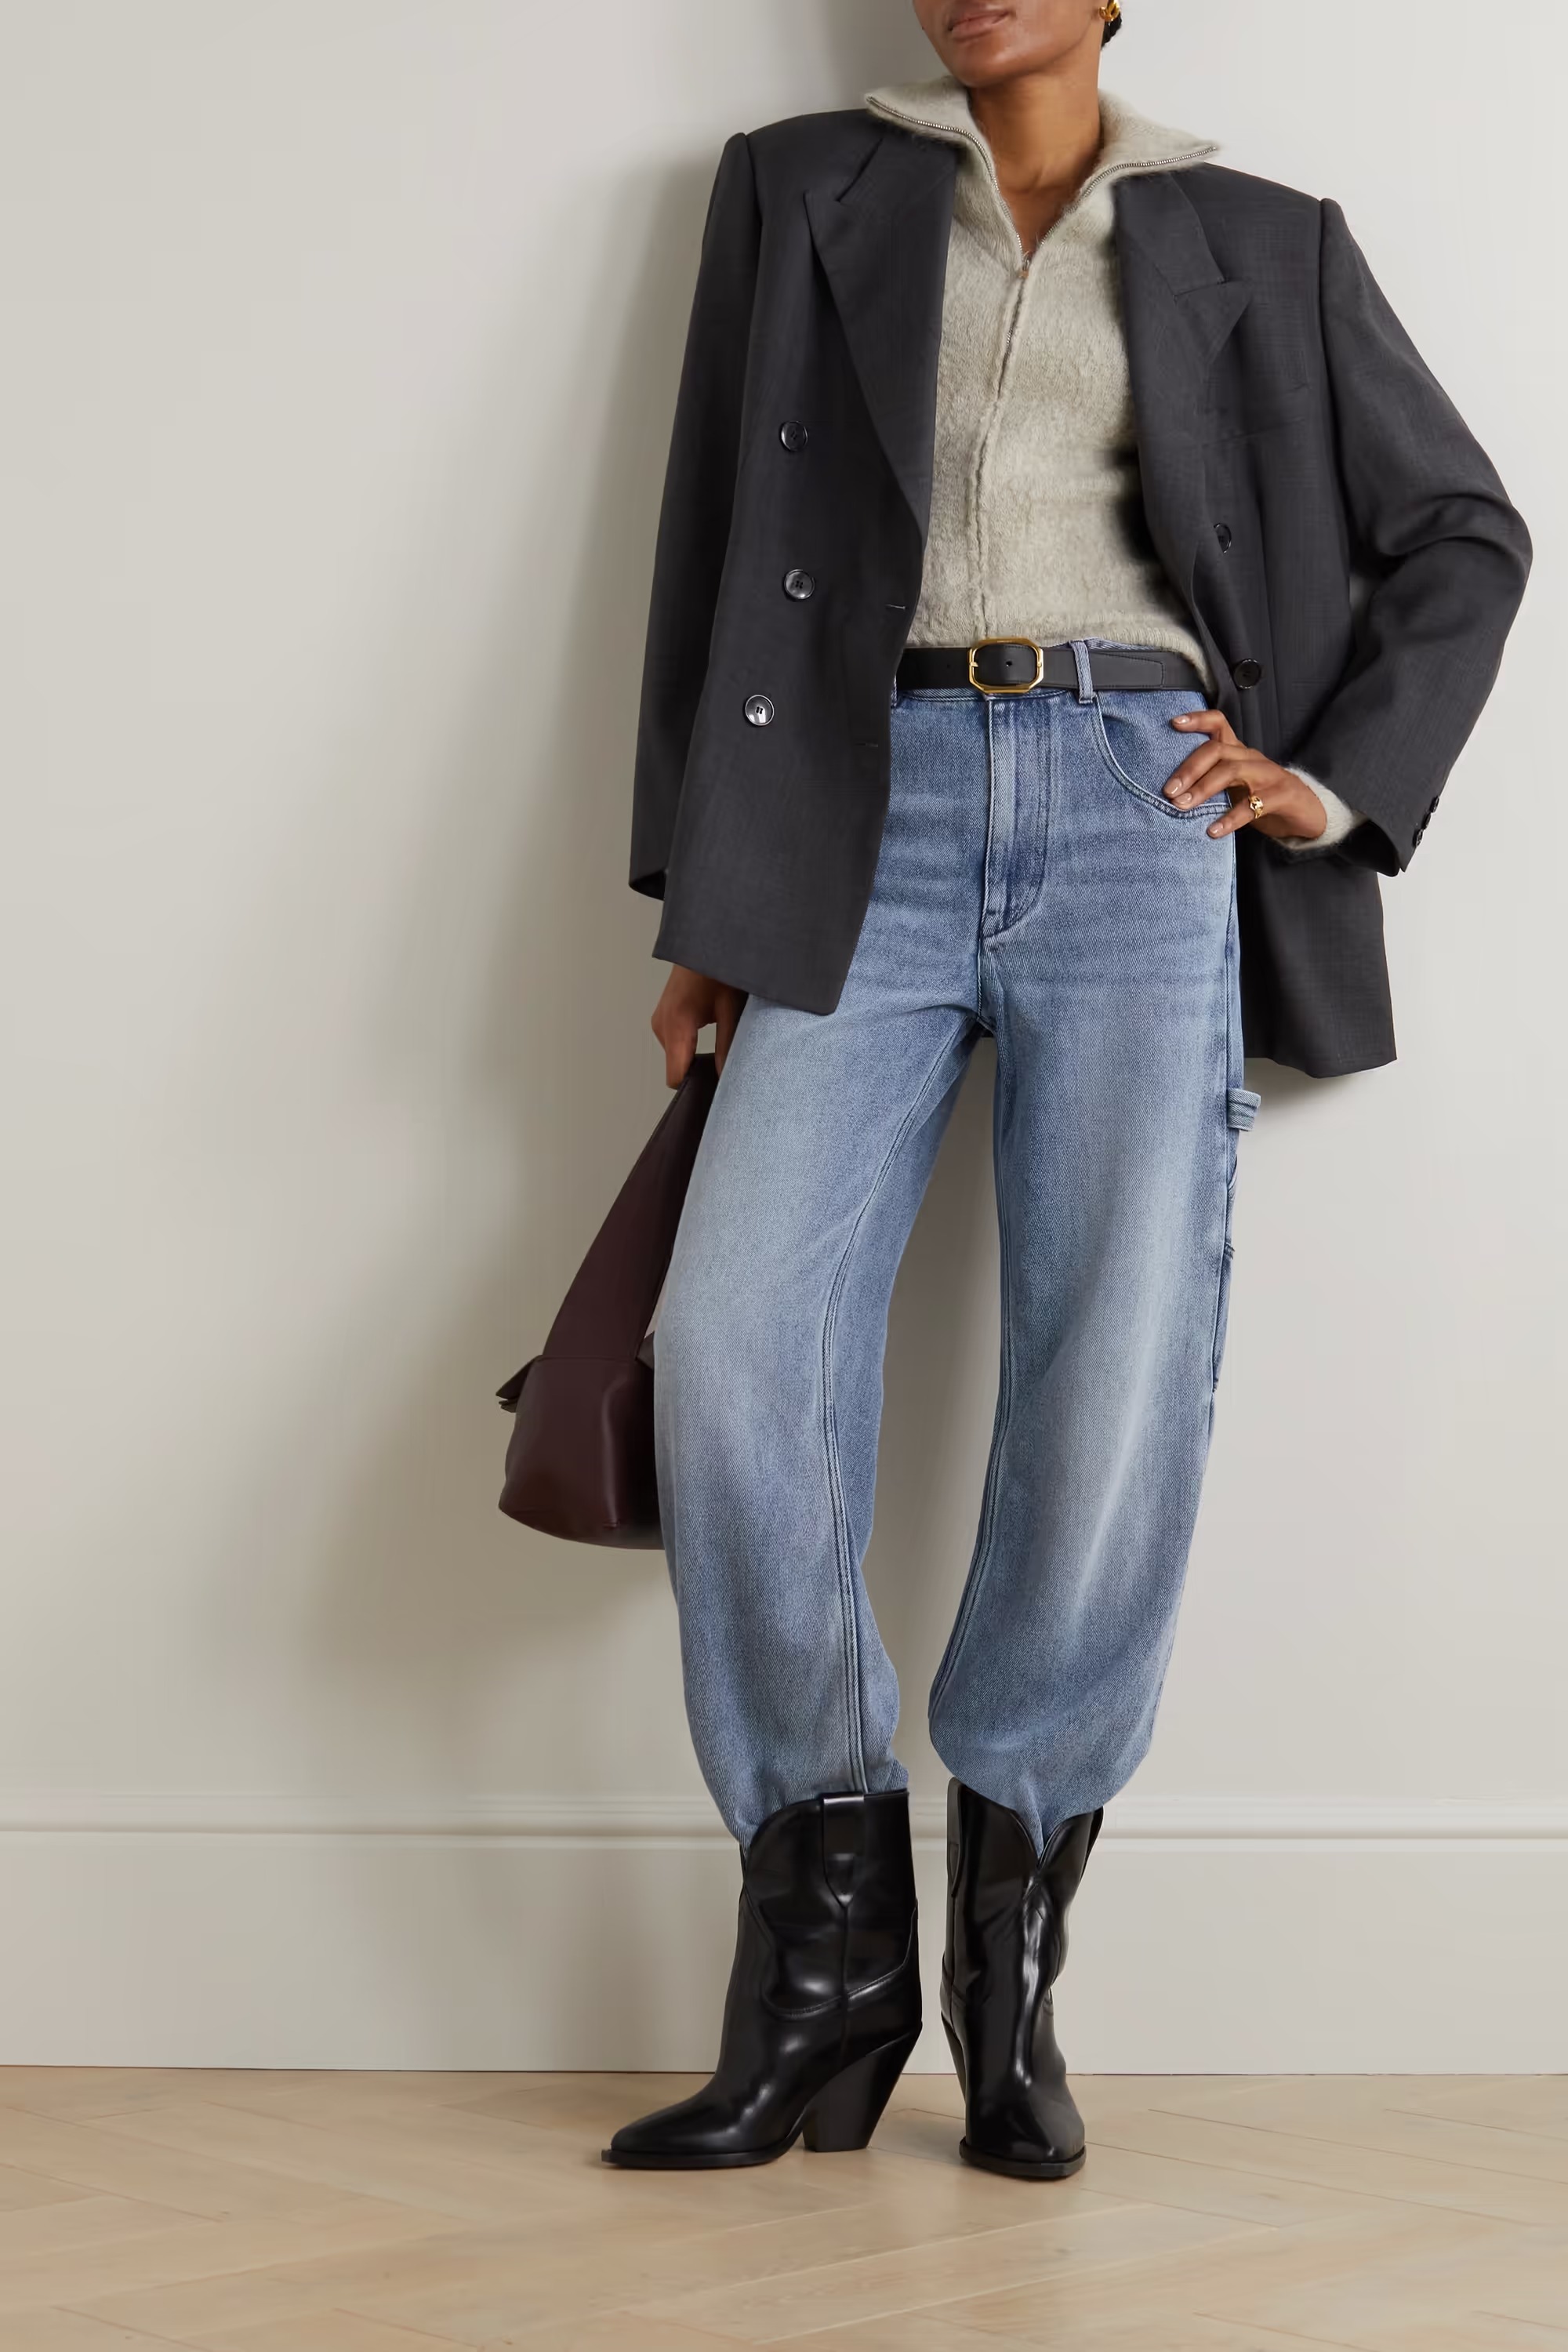 16 Winter Wardrobe Pieces From Net-a-Porter | Who What Wear